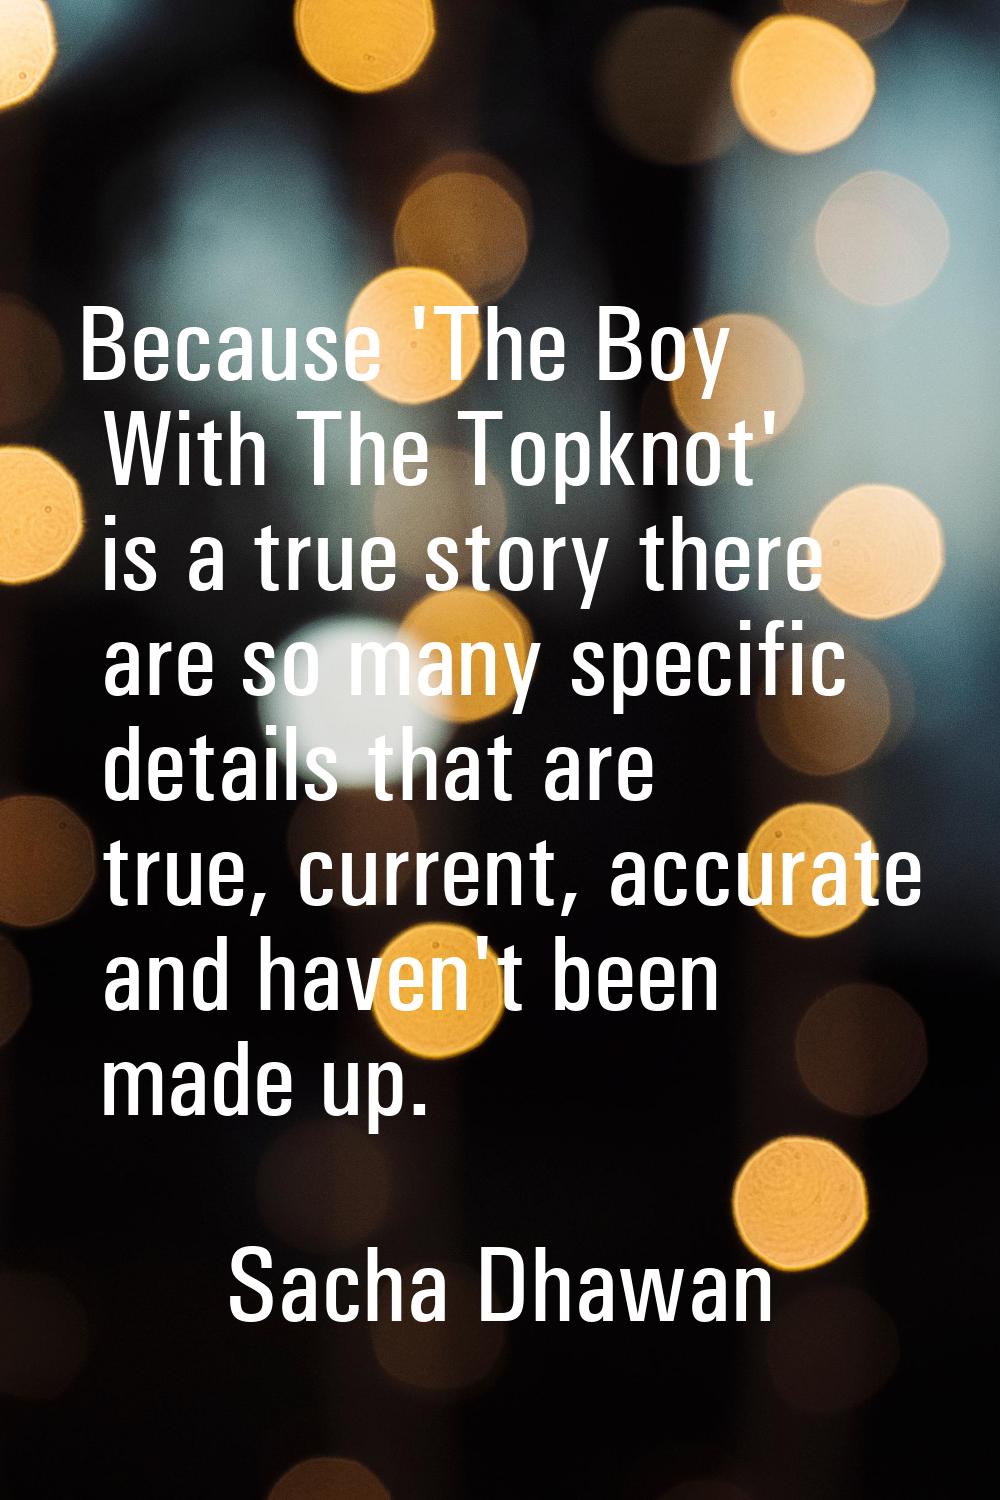 Because 'The Boy With The Topknot' is a true story there are so many specific details that are true